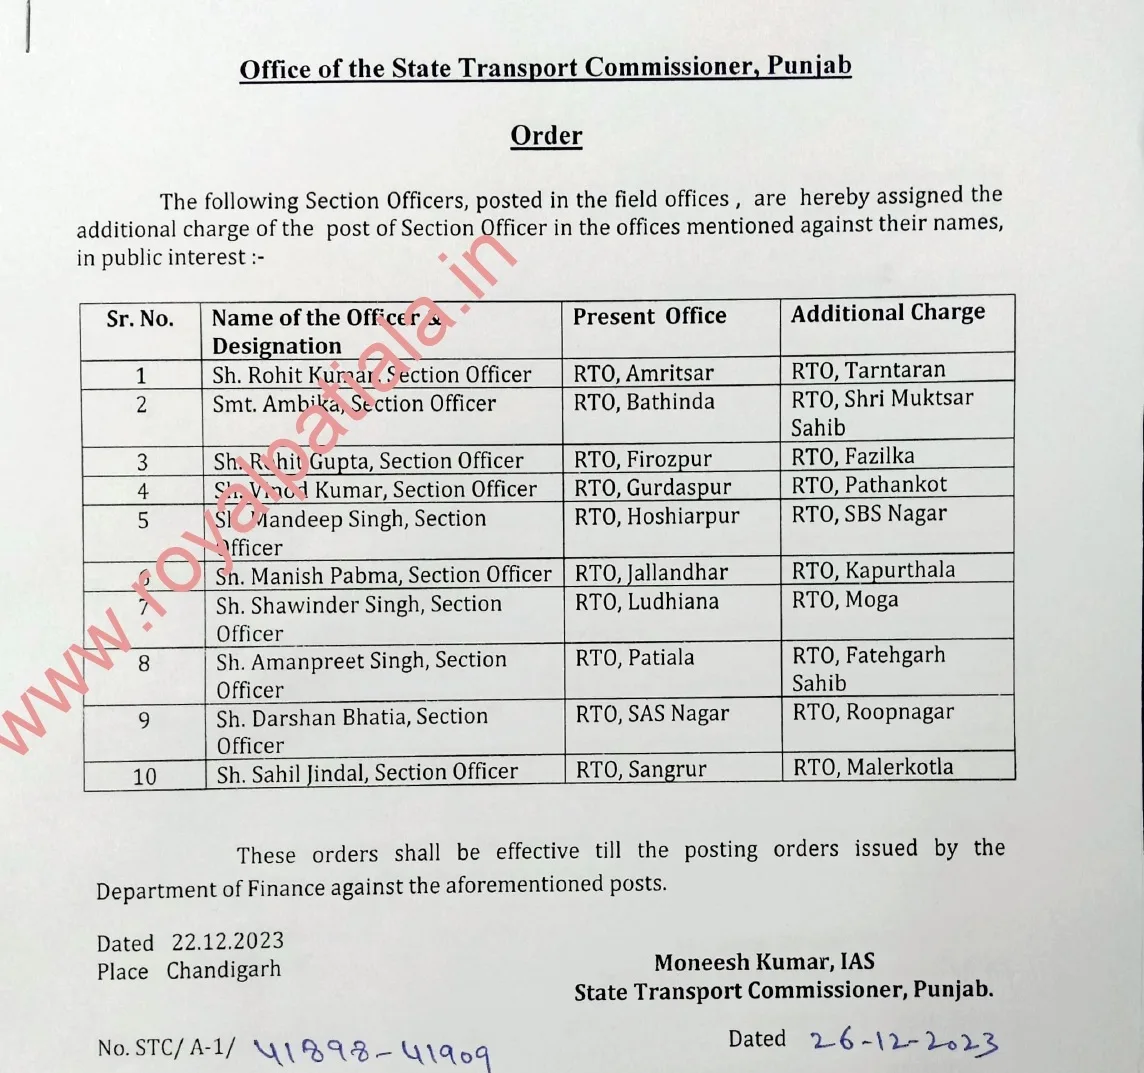 10 SOs in transport department given additional charge after restructuring of the department